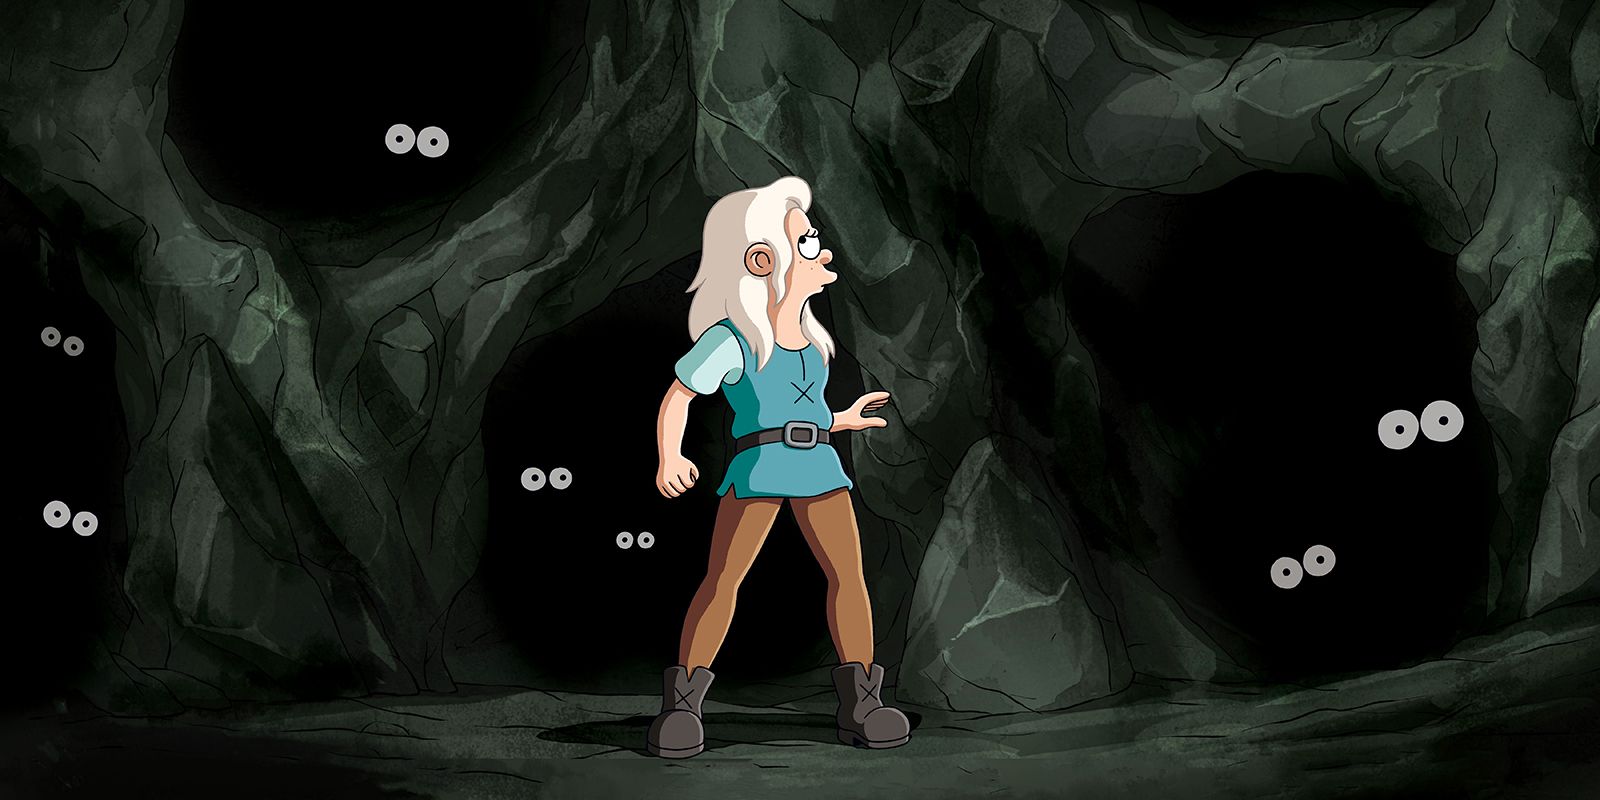 Bean standing in the Cave of Eyes in Disenchantment